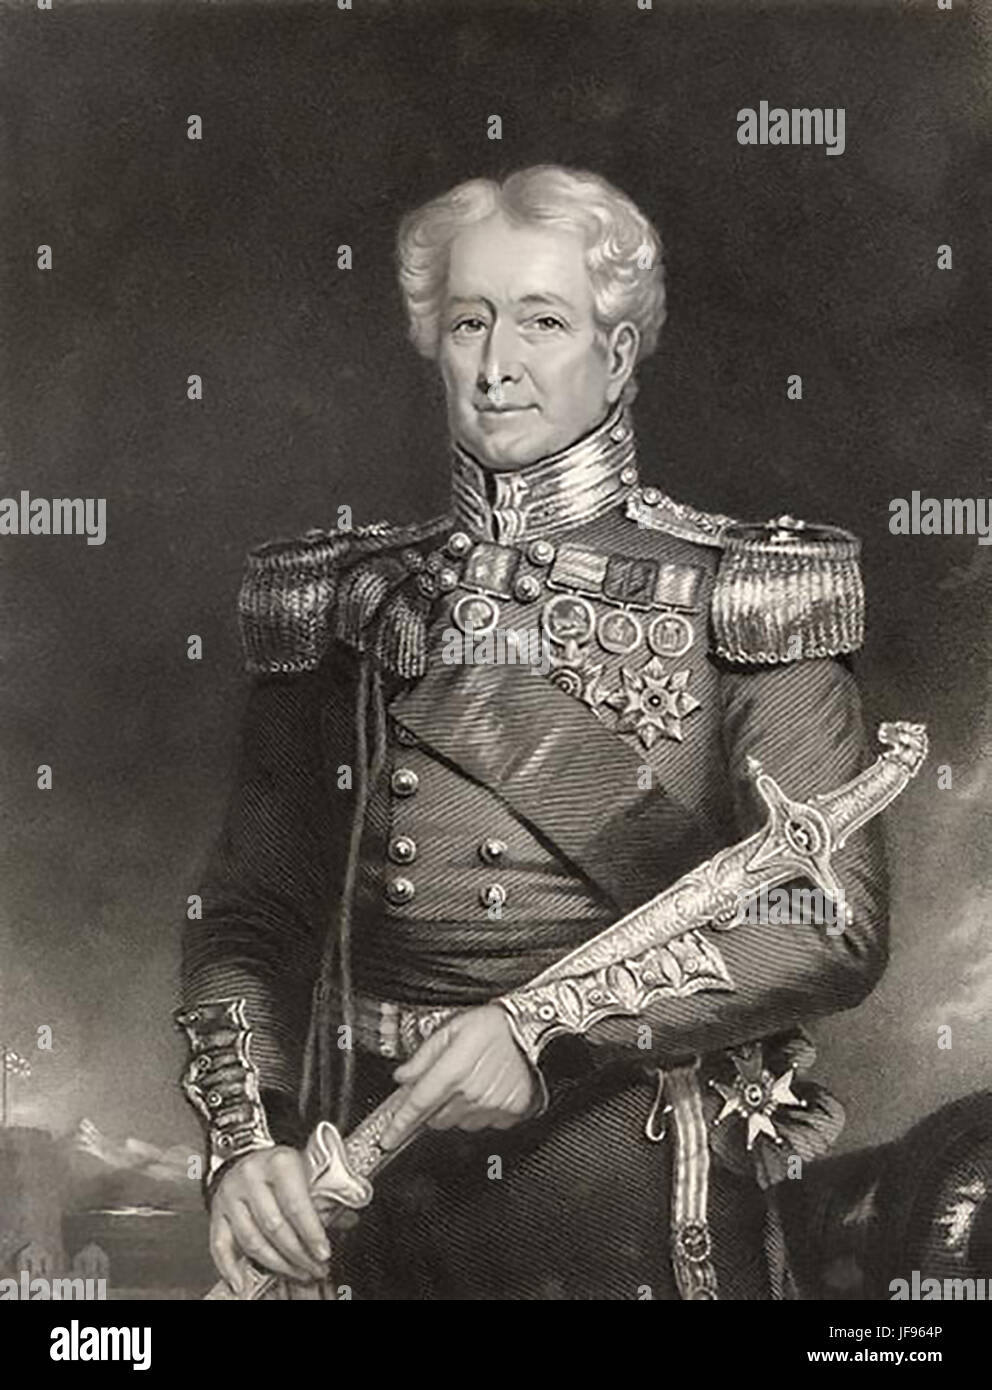 ROBERT SALE (1782-1845) British Army Major General  killed in action during the First Anglo-Sikh War of 1845-6. Engraving about 1819. Stock Photo